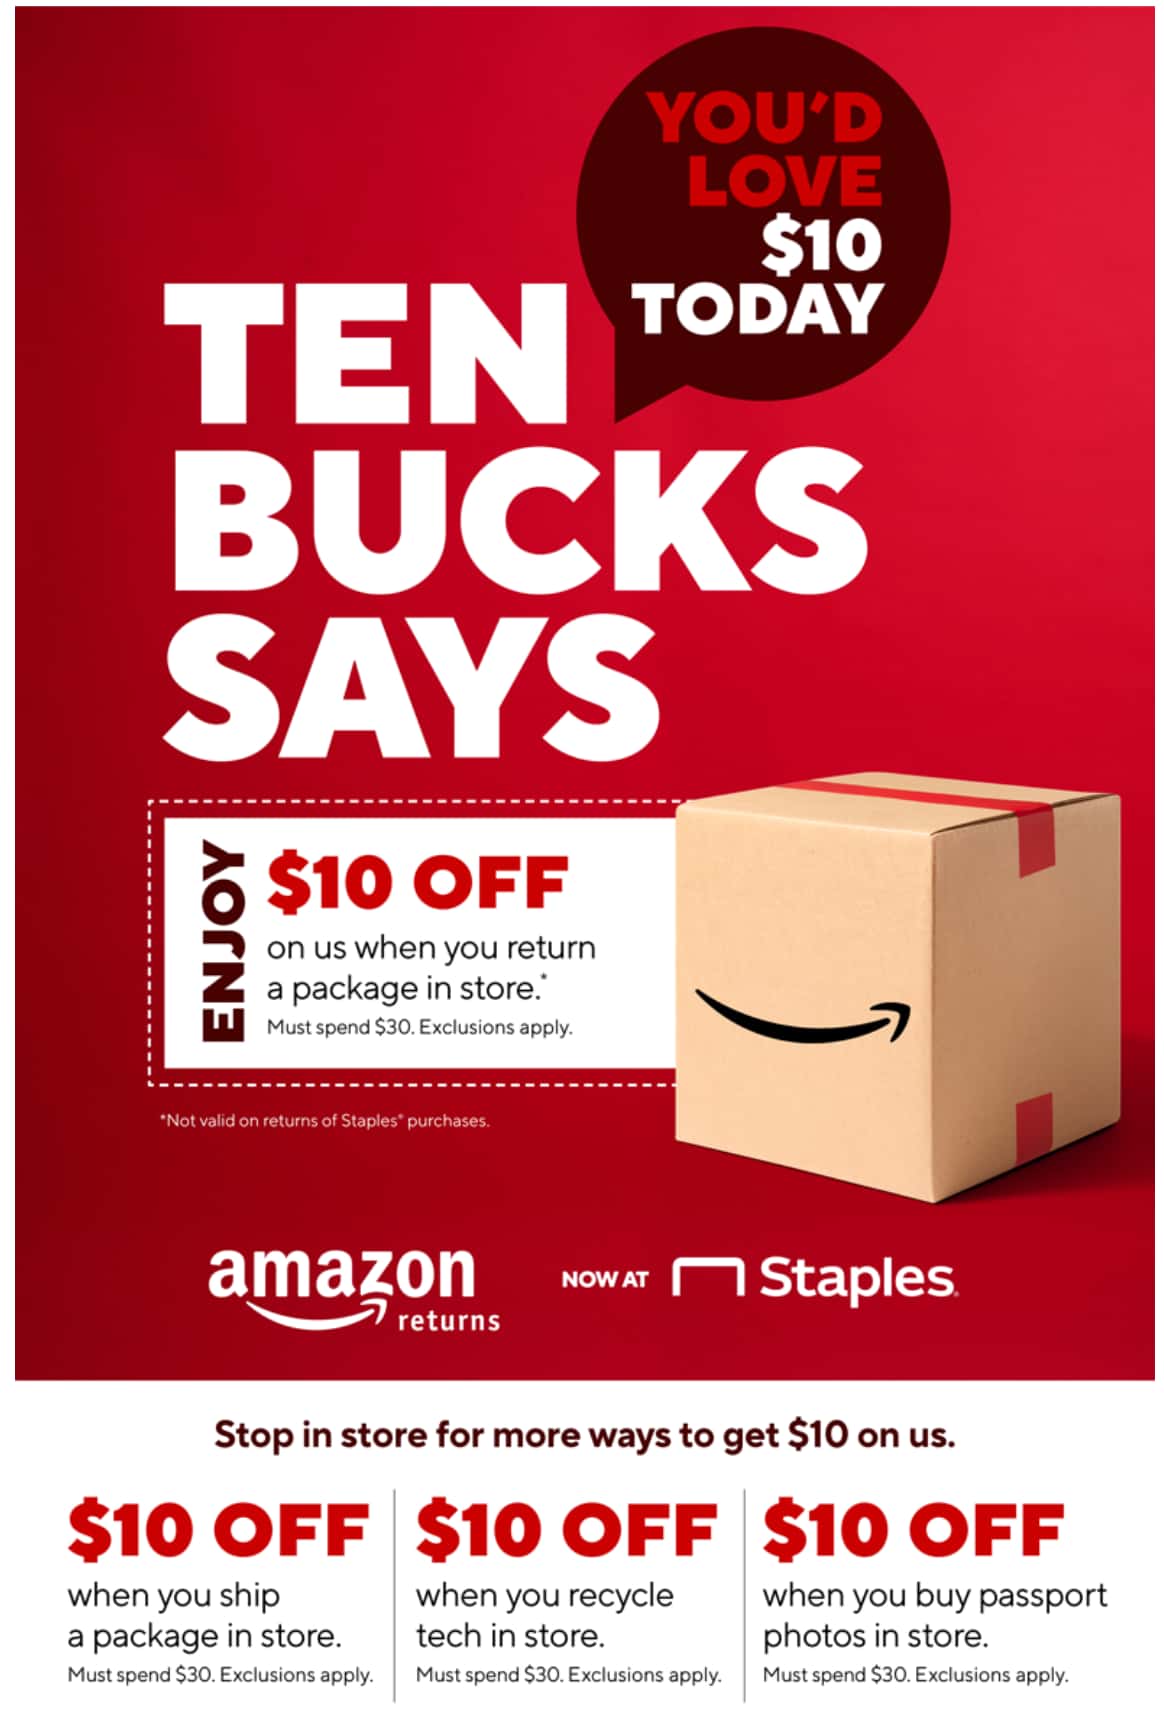 Staples Weekly Ad May 22 to May 28, 2022 1 – staples ad 1